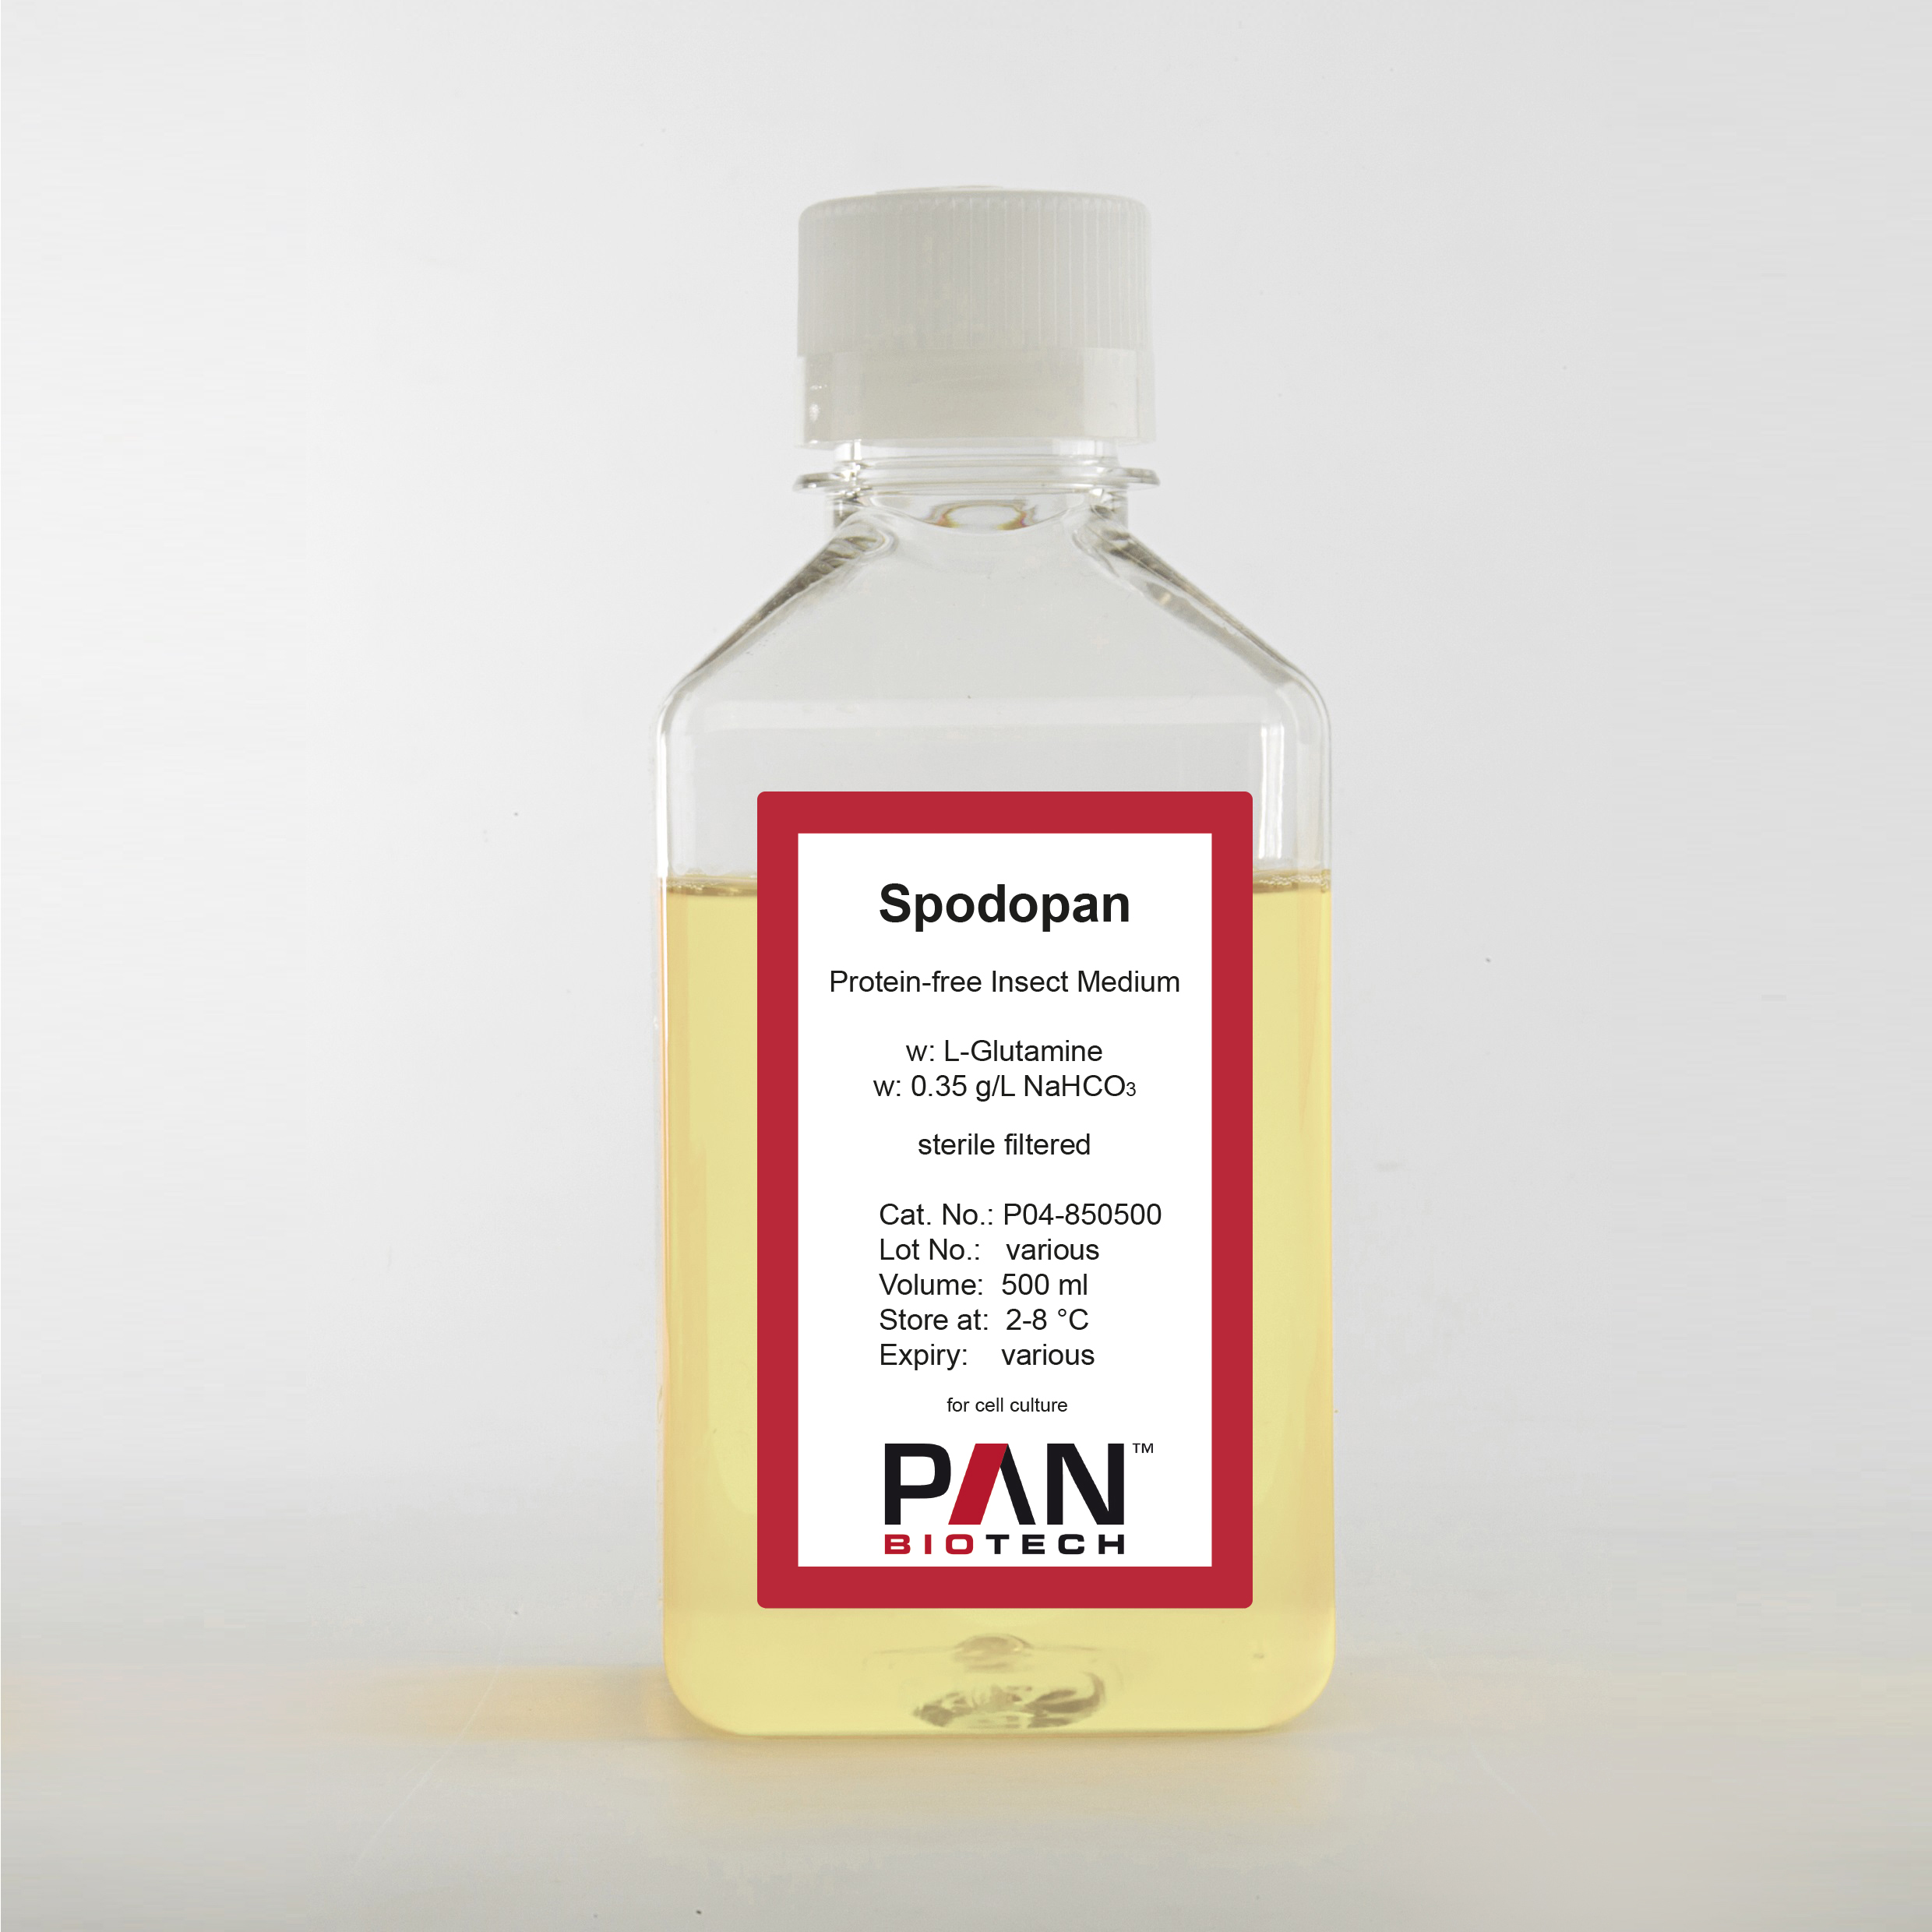 Spodopan, Protein-free medium for Insect-cells, w: L-Glutamine, w: 0.35 g/L NaHCO3